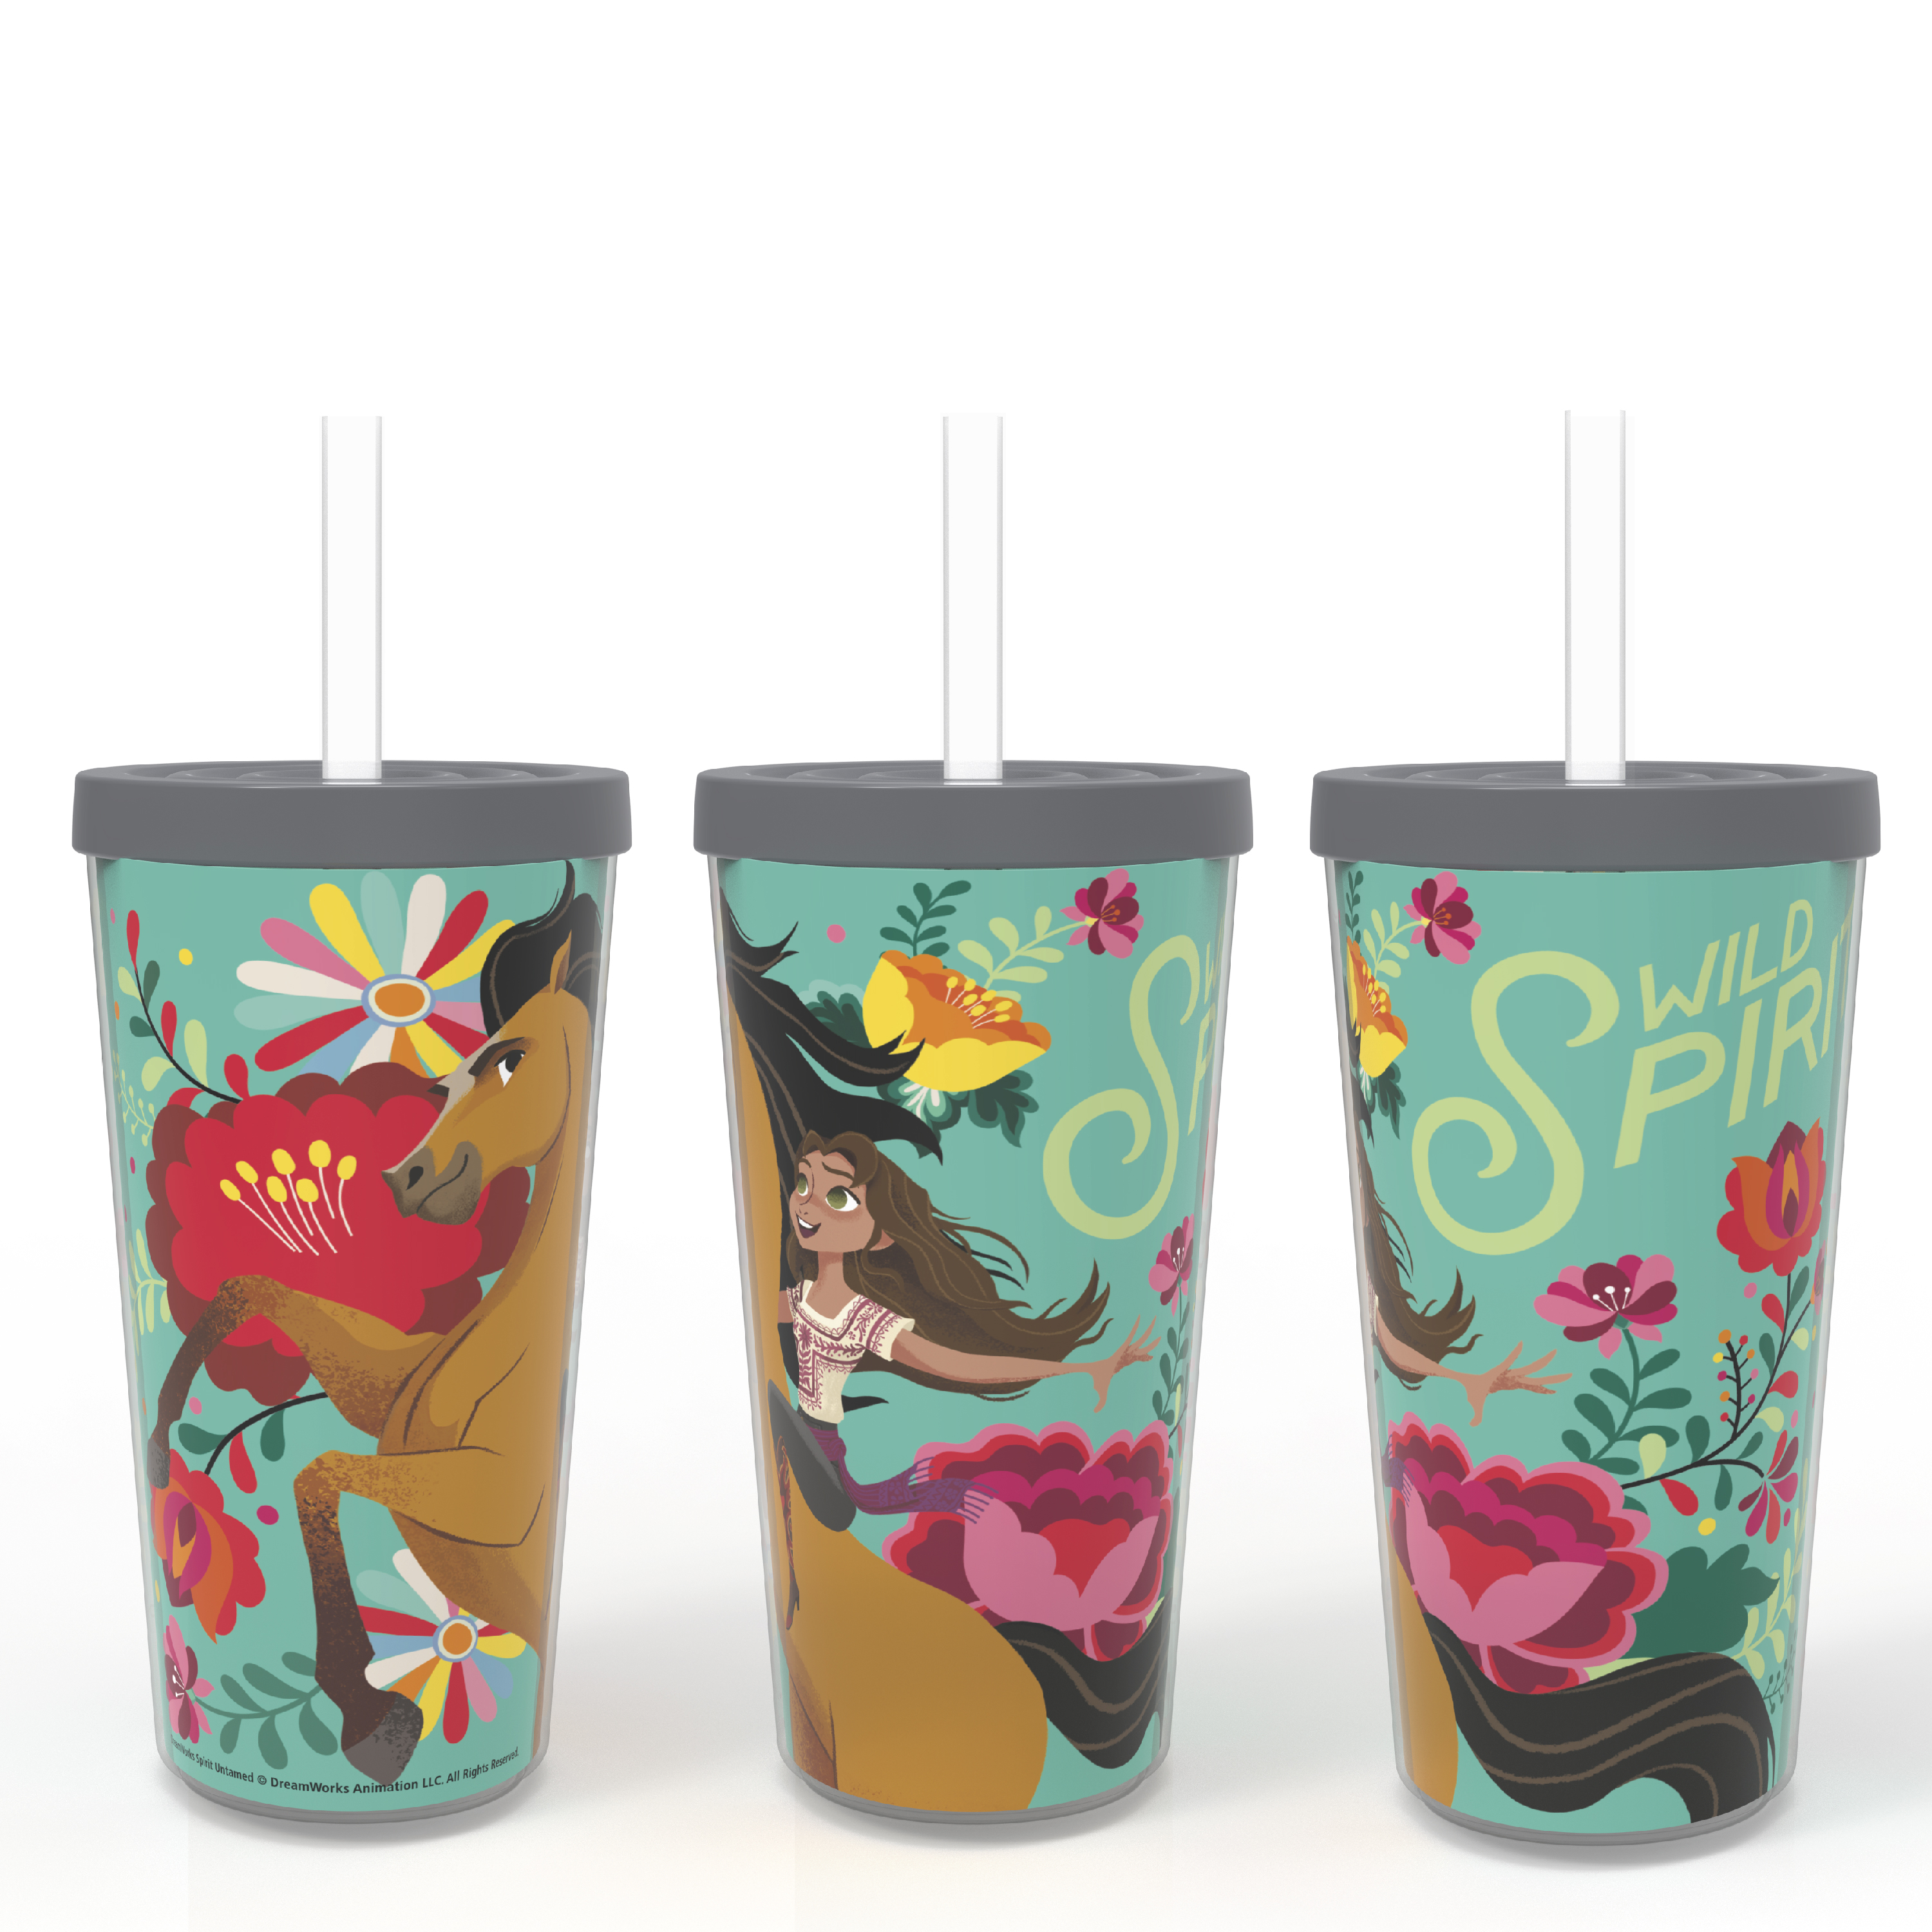 Dreamworks Animation 16 ounce Insulated Plastic Tumbler with Straw, Spirit Riding Free Movie slideshow image 2